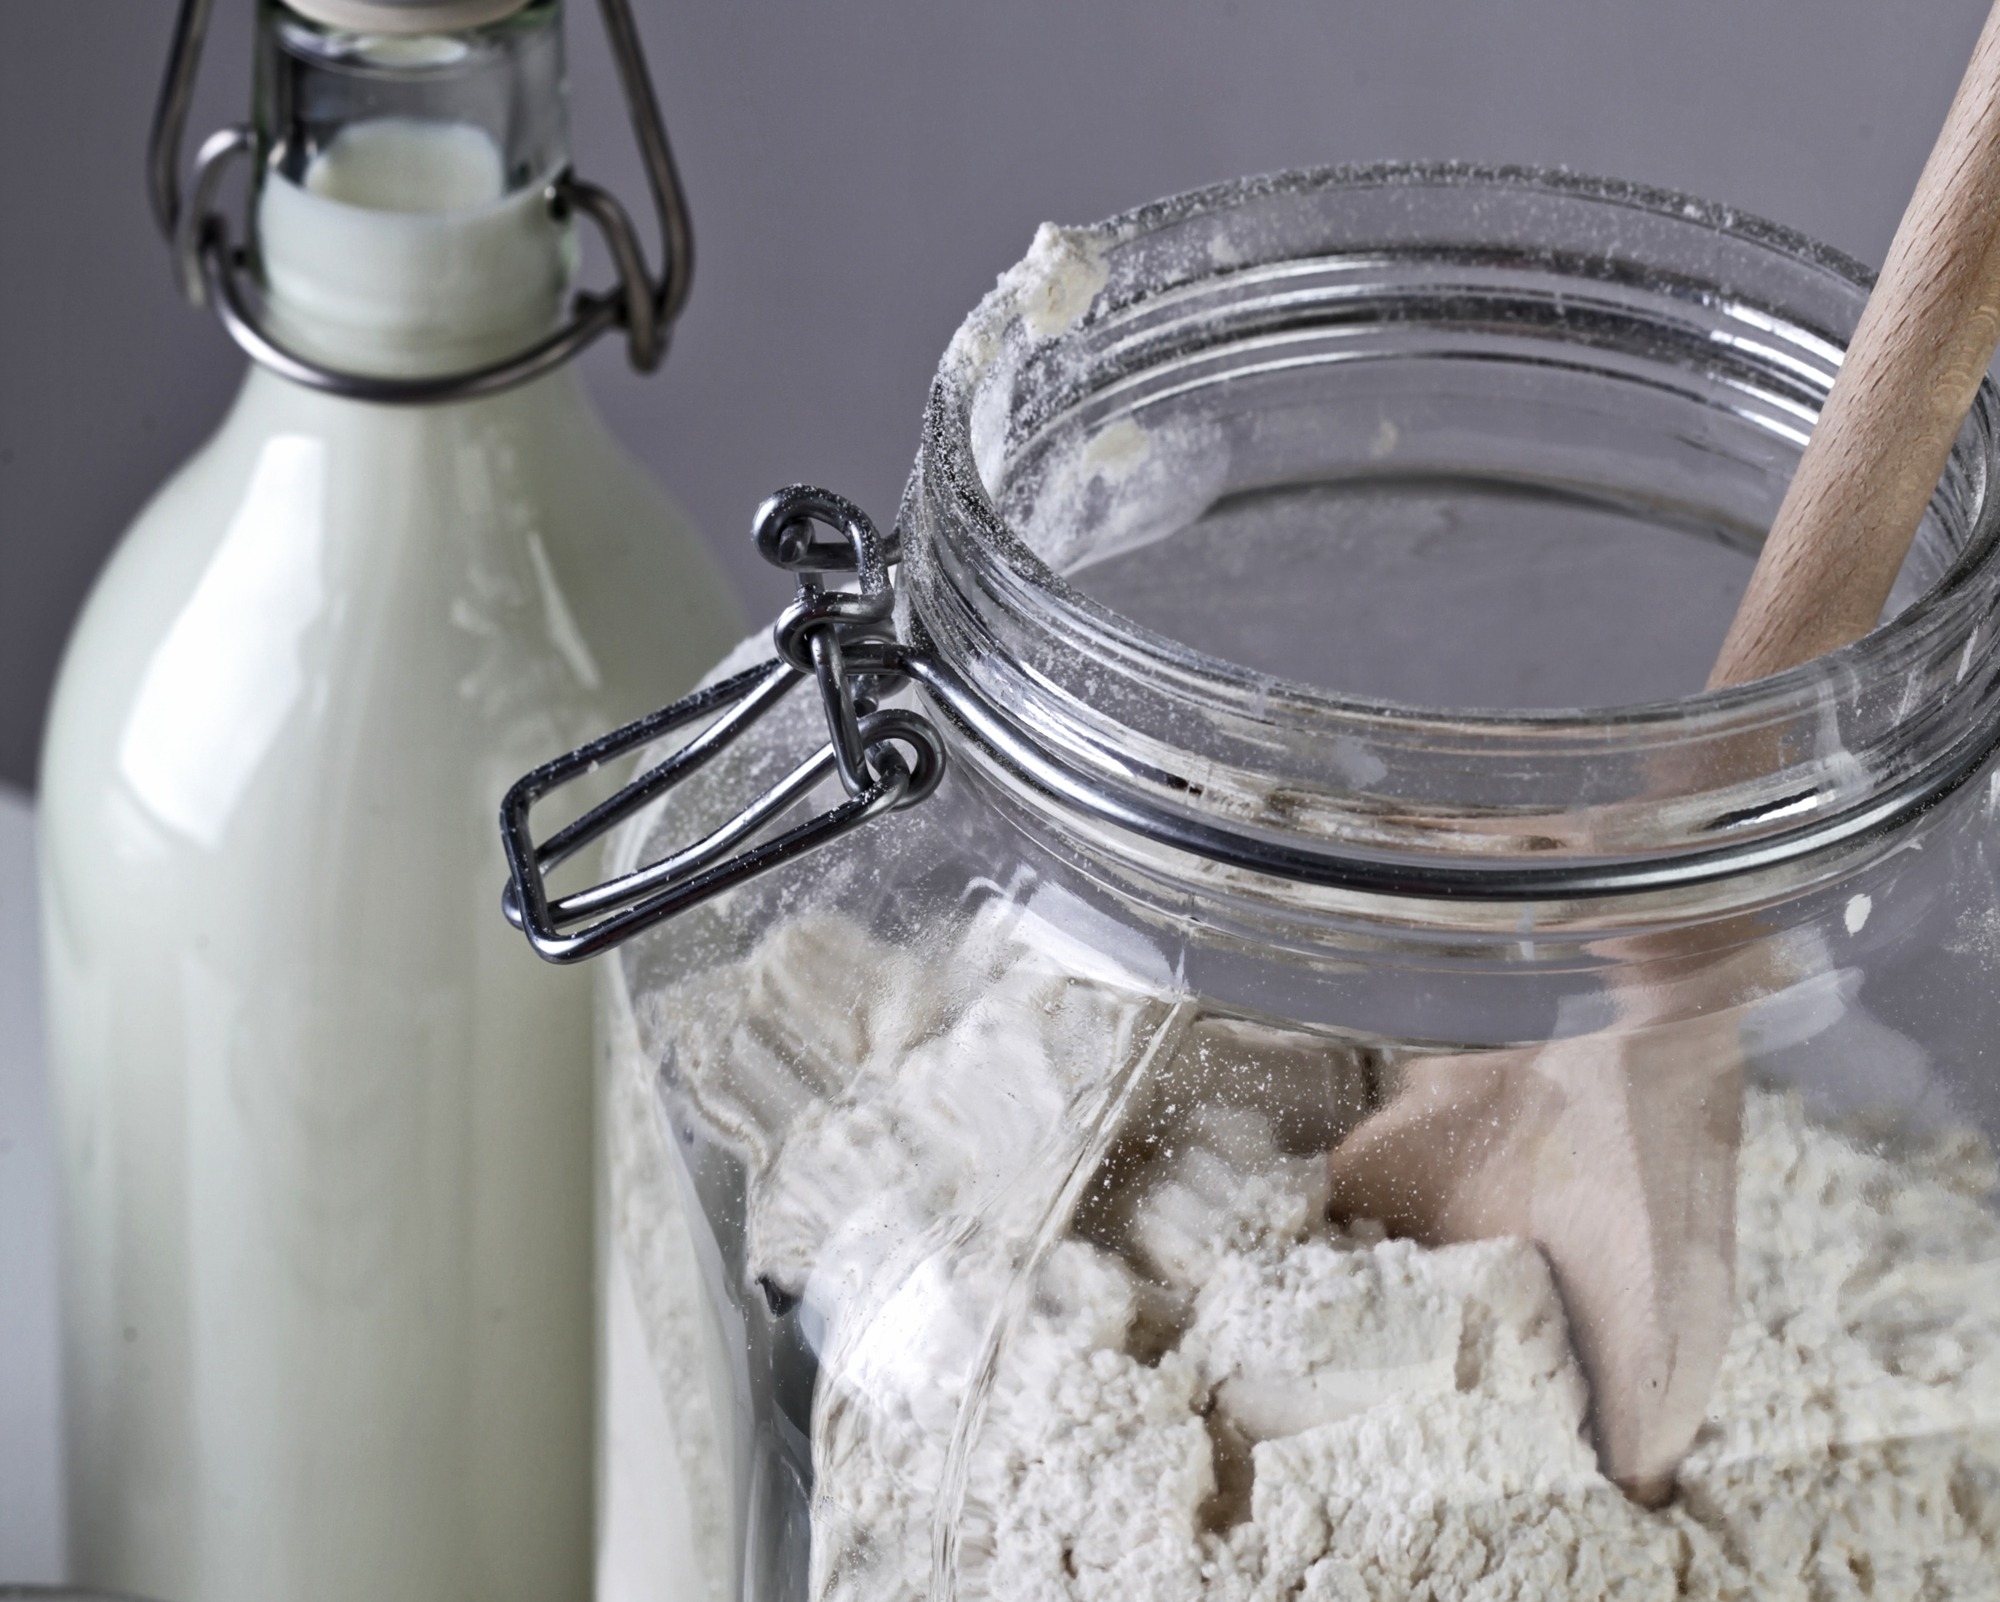 6 Uses of Baking Soda for Cleaning